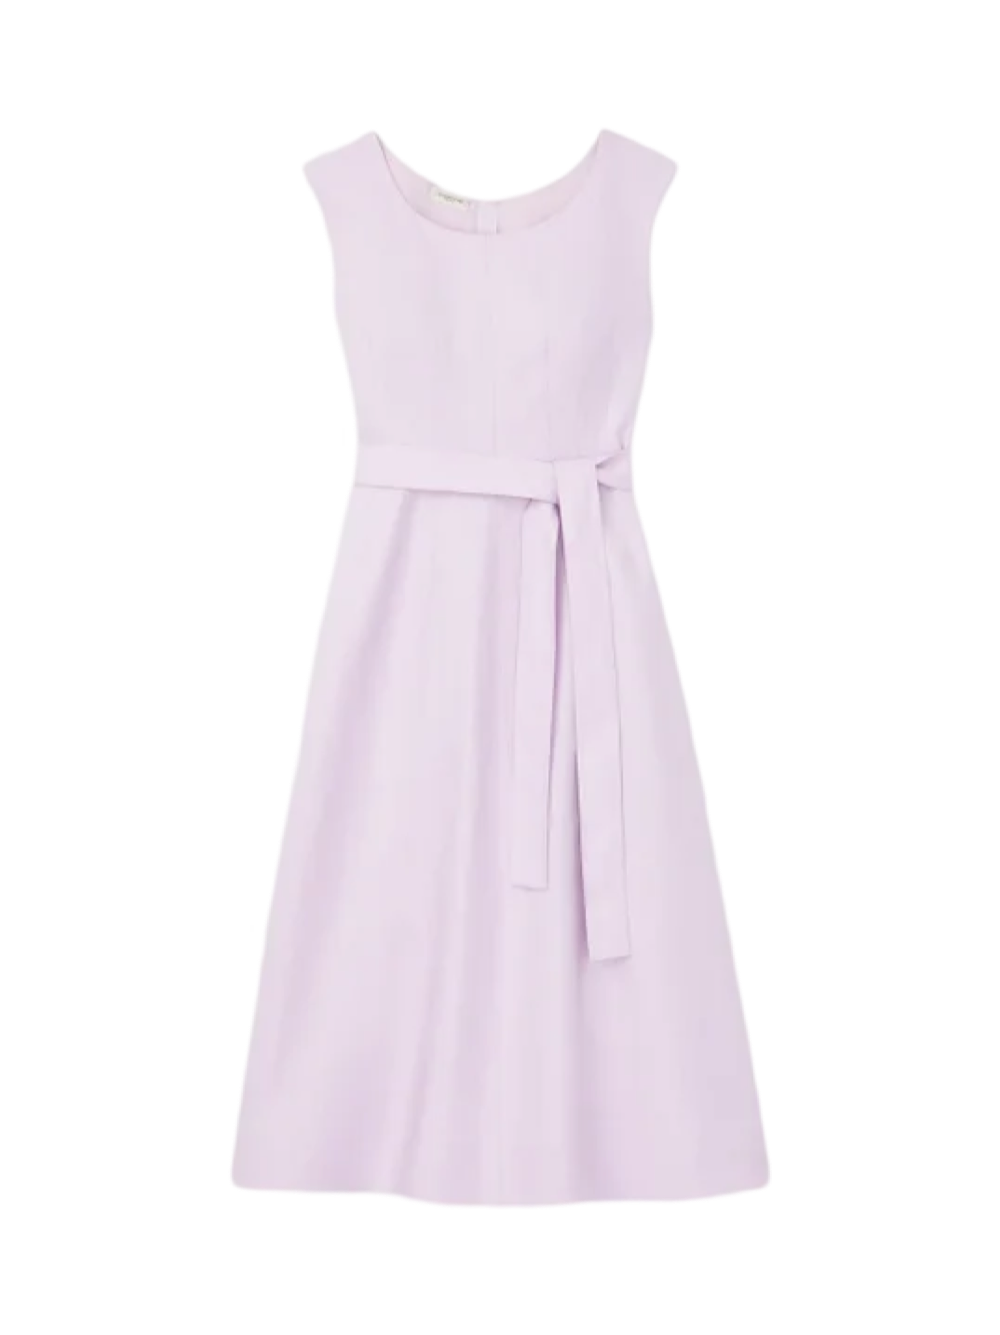 Lafayette 148 Fit & Flare Belted Dress in Dried Blossom